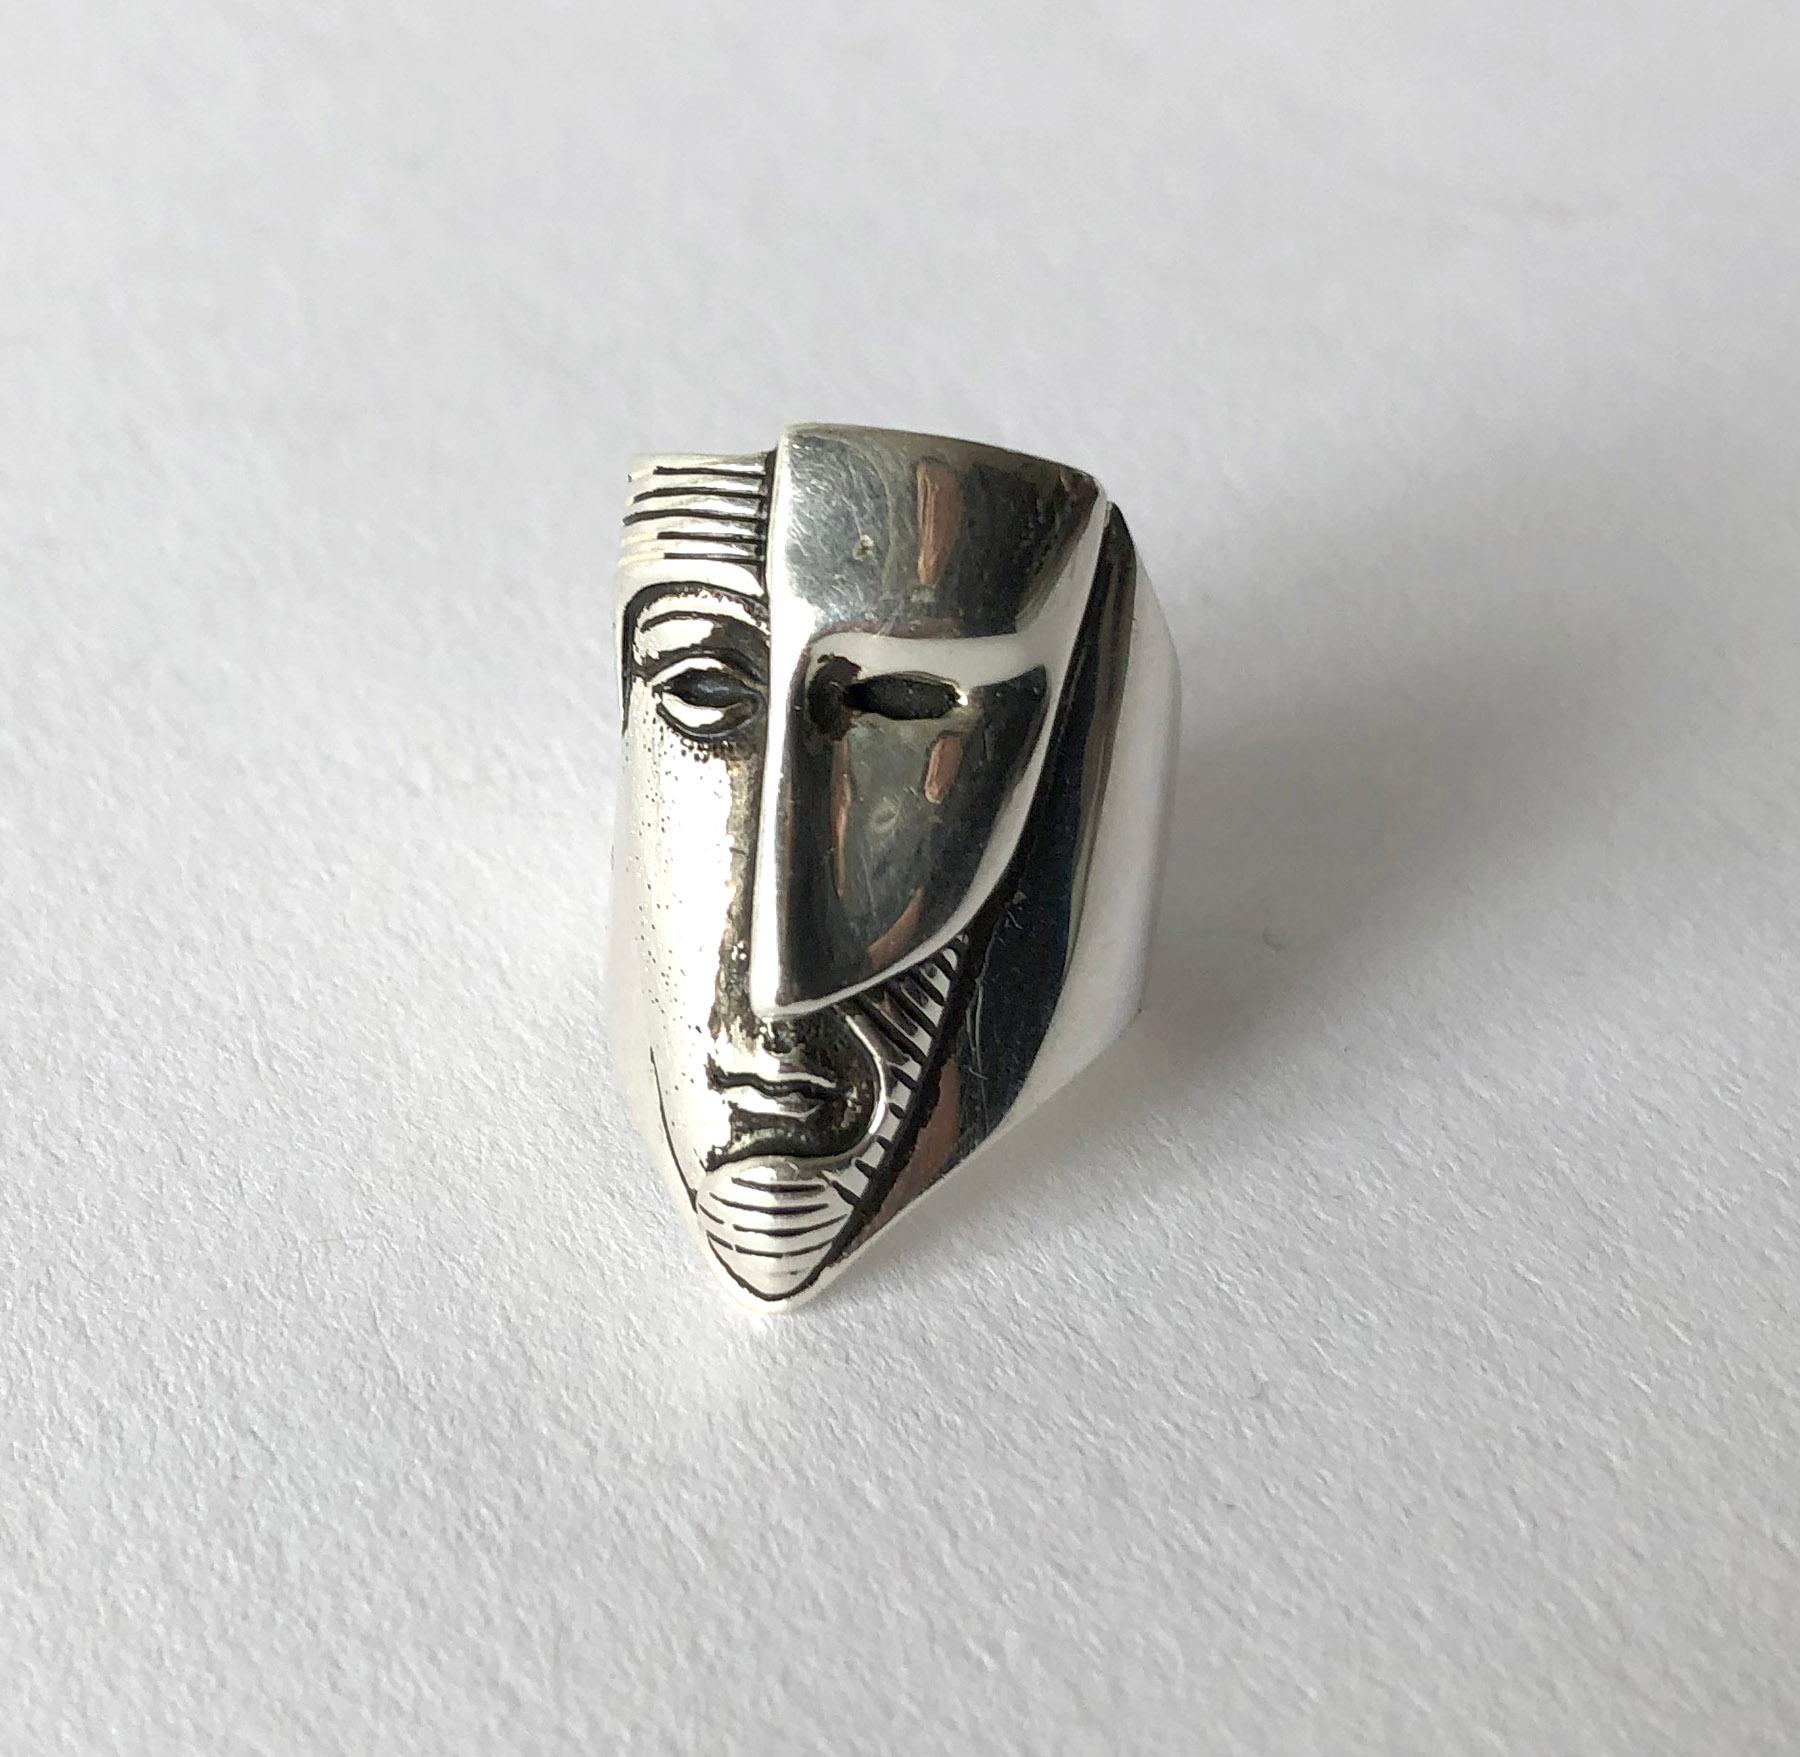 Mexican modernist sterling silver face with mask ring created by sculptor and jeweler Sergio Bustamante.  Ring is a finger size 6.  The face of the ring measures 1 1/8